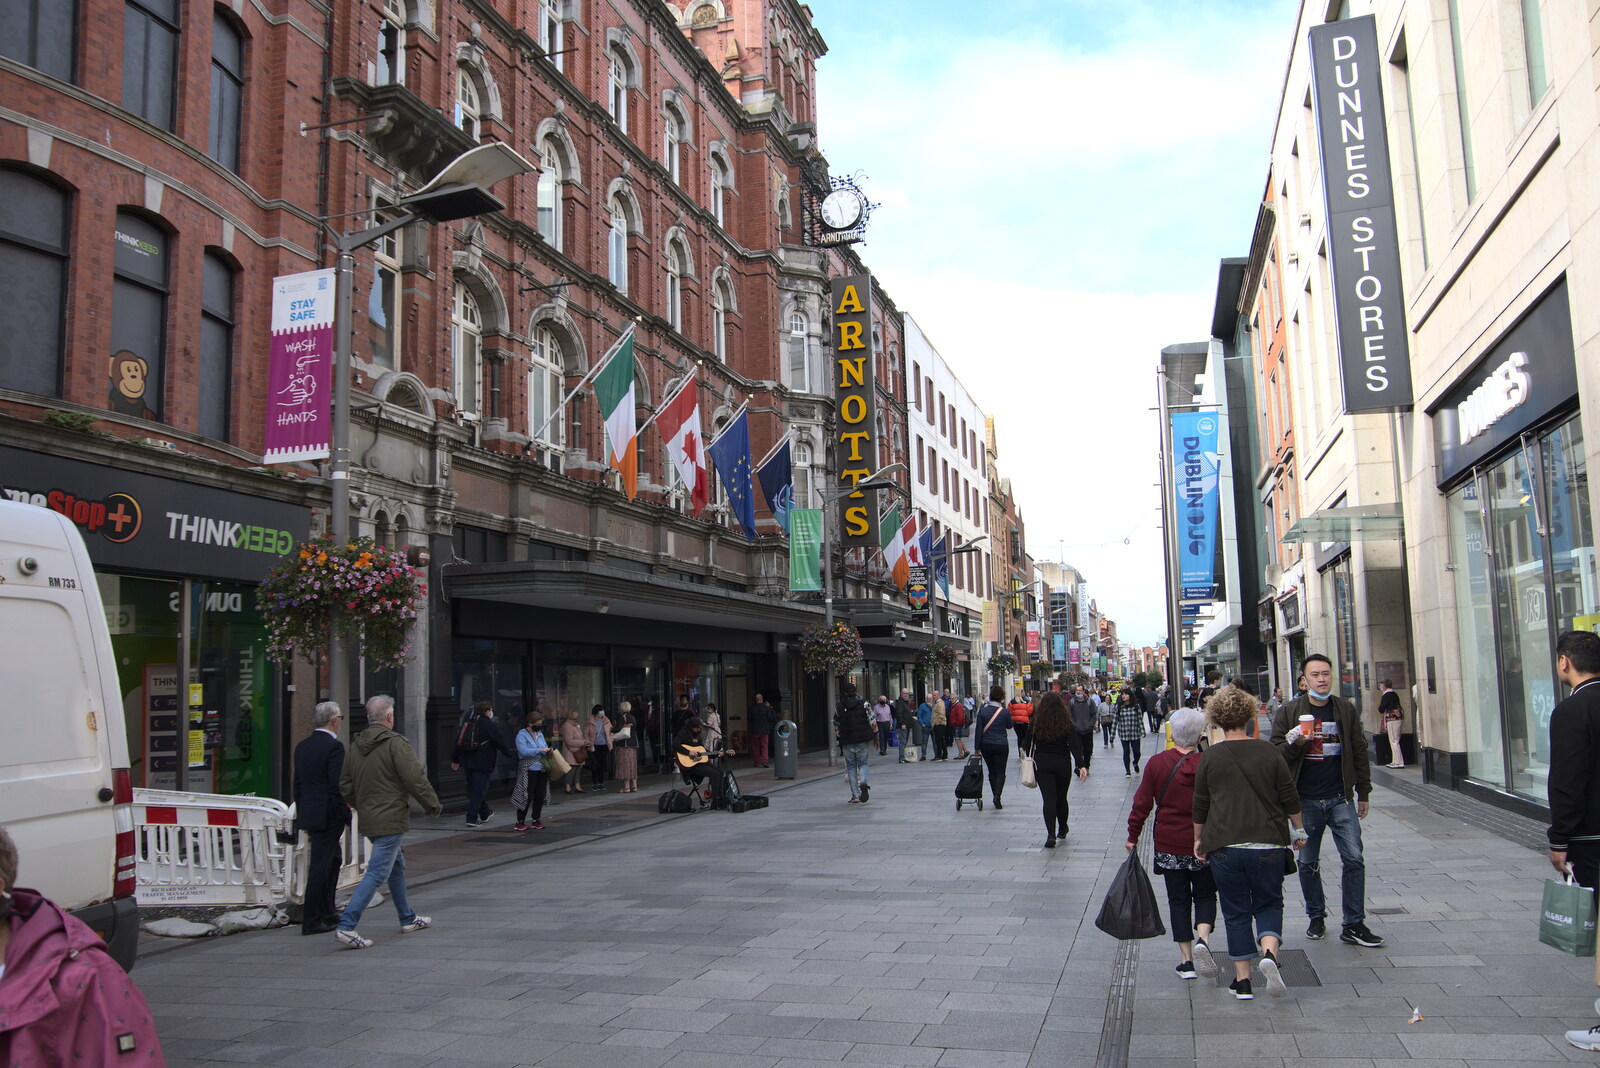 Arnotts on Henry Street from A Trip to Noddy's, and Dublin City Centre, Wicklow and Dublin, Ireland - 16th August 2021